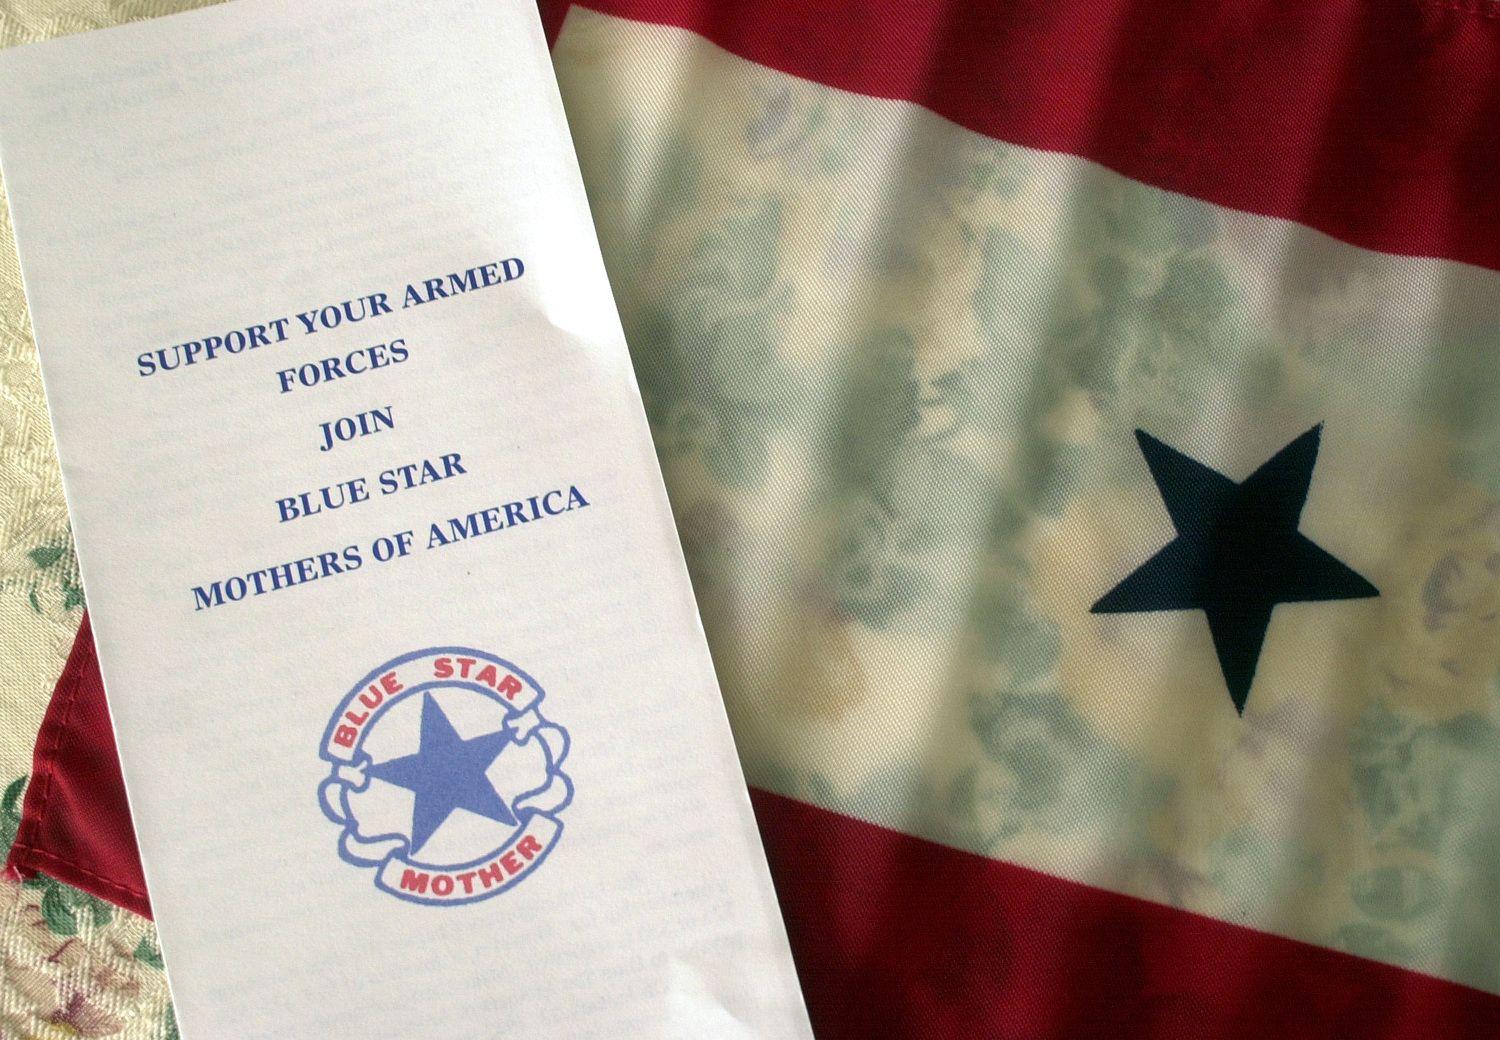 Blue Star Mother's of America Logo - Blue Star Mothers Questioned Over Terminations – WCCO | CBS Minnesota